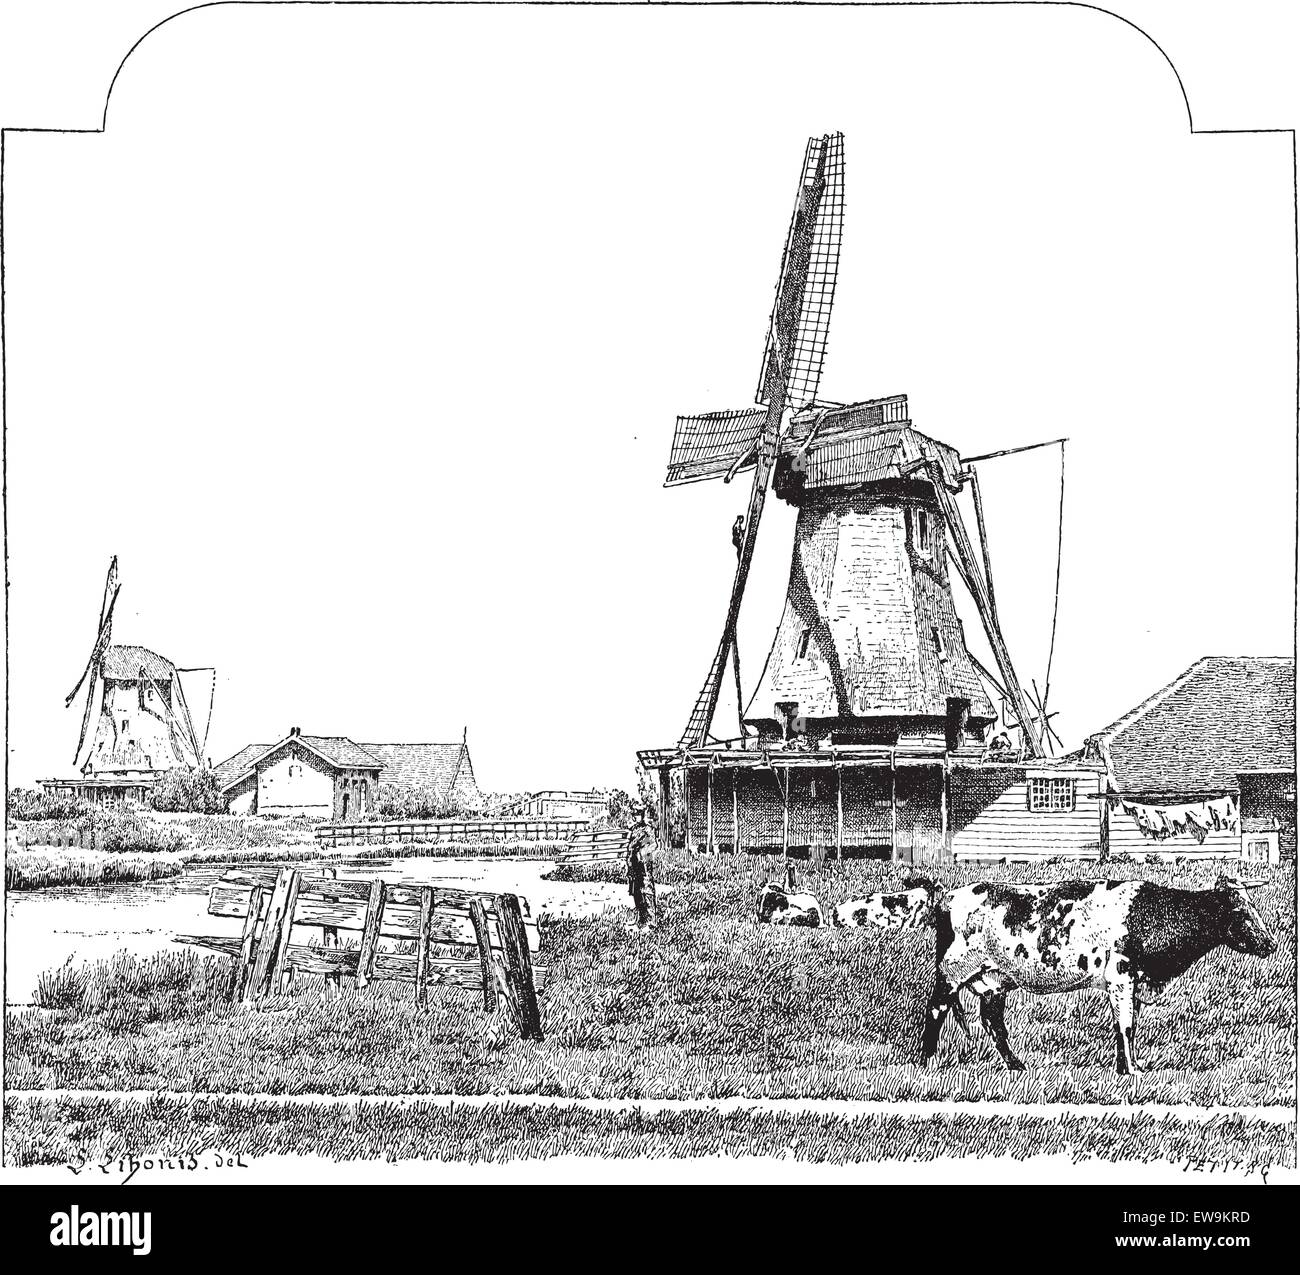 Mills, Zaandam (Holland), vintage engraved illustration. Dictionary of words and things - Larive and Fleury - 1895. Stock Vector